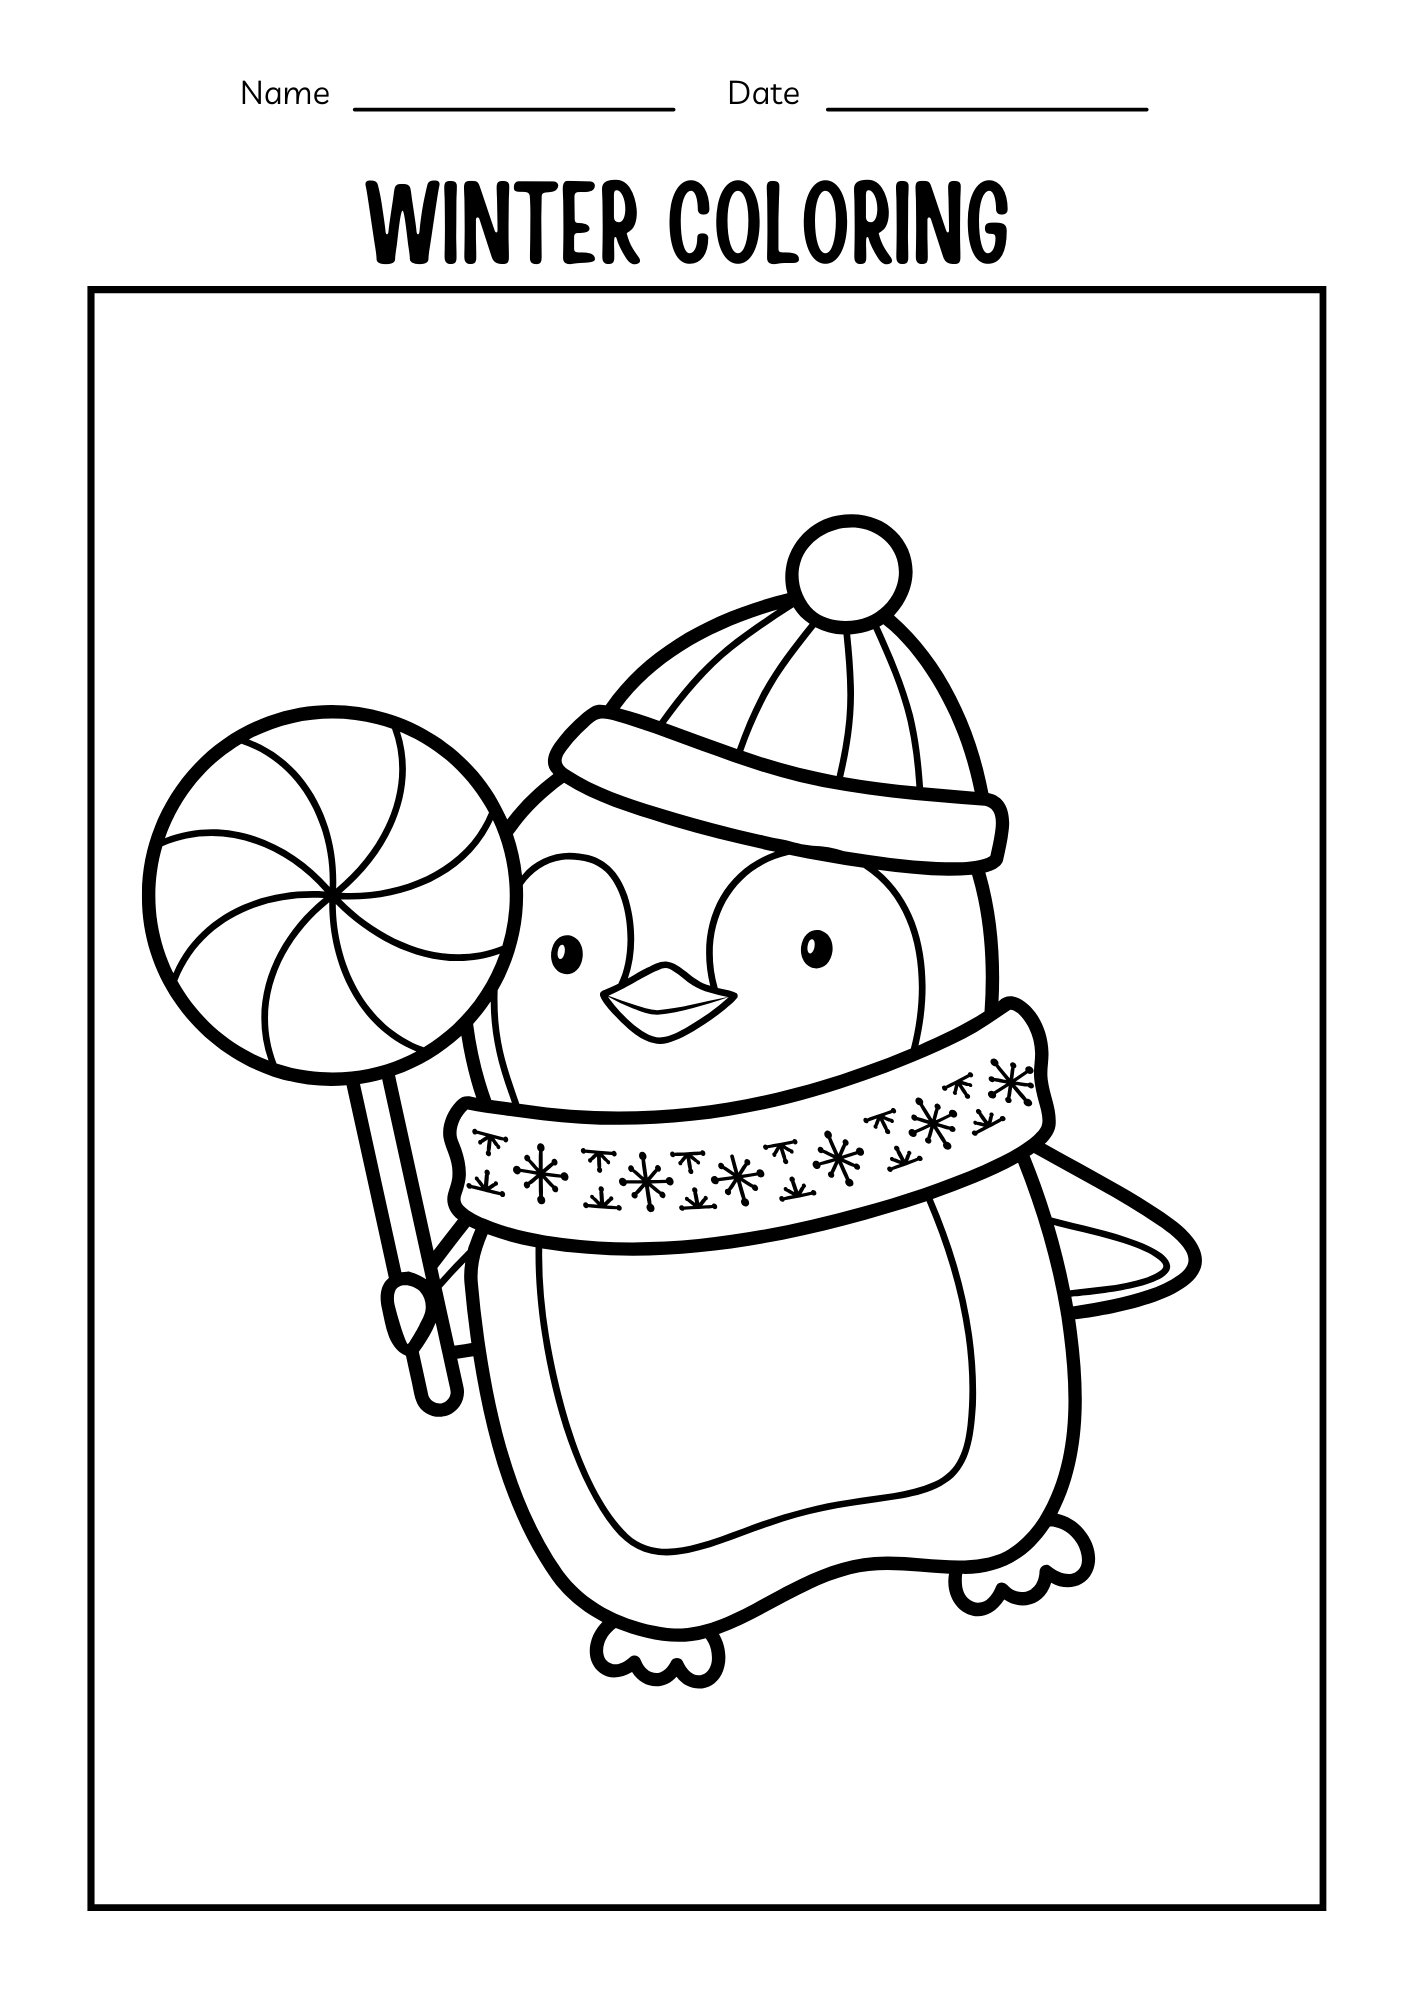 Winter Coloring Pages, Winter Coloring Printable, Winter Worksheet